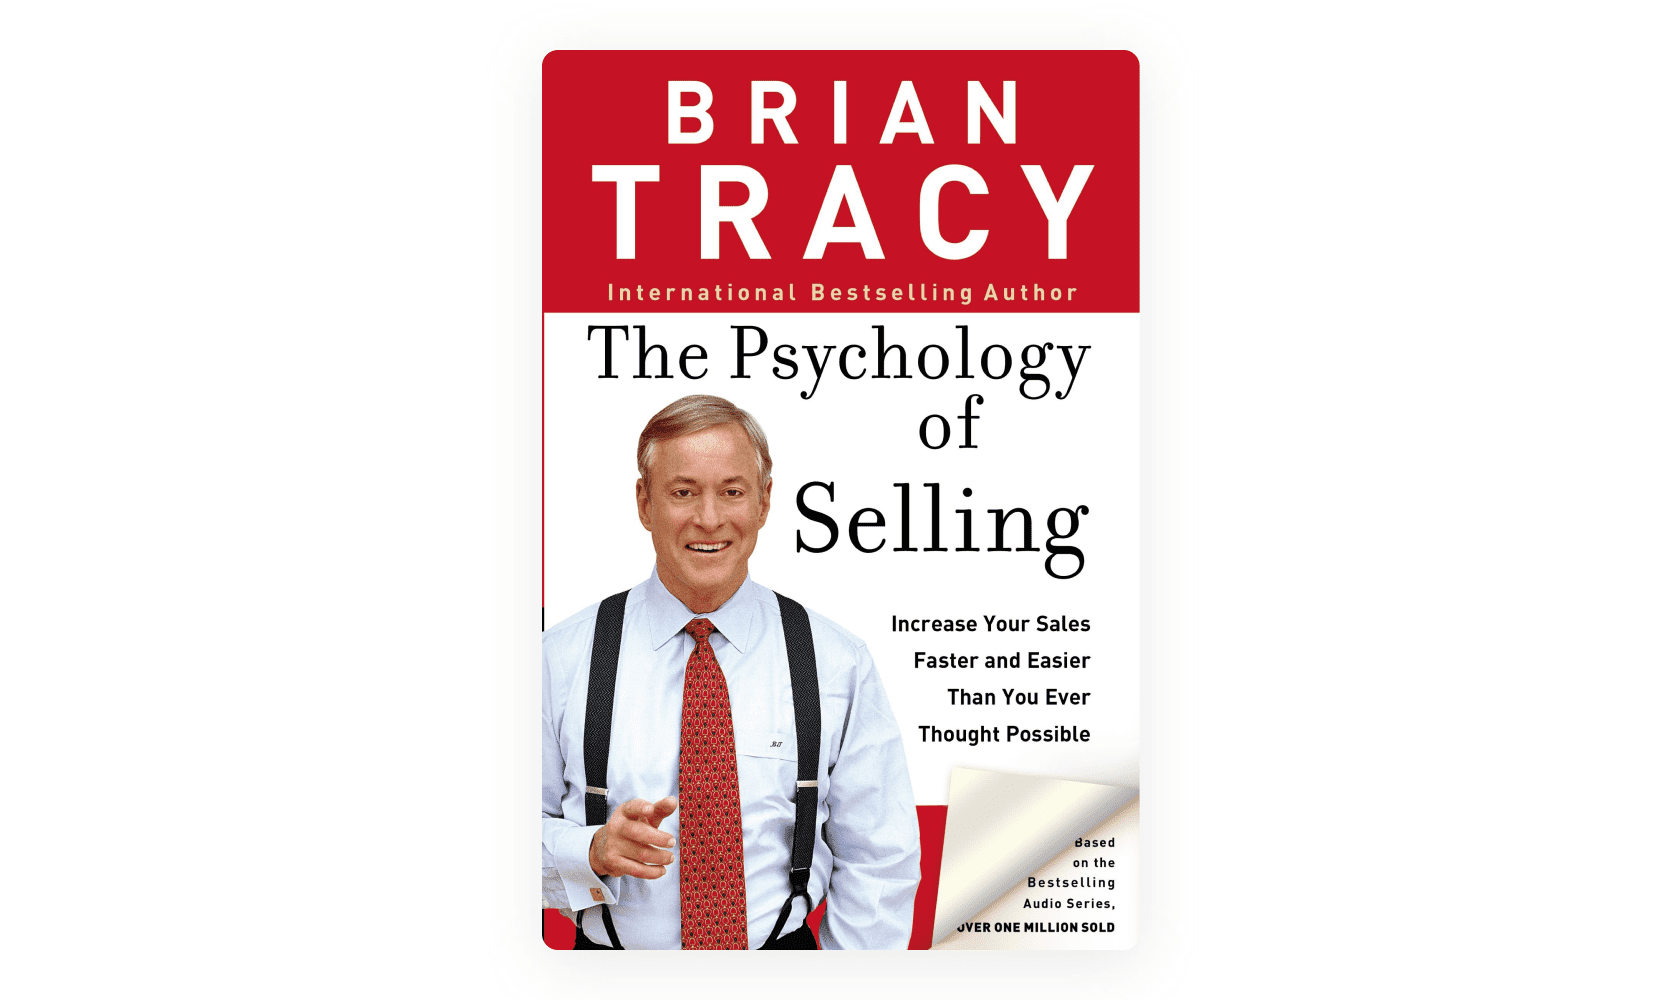 6 Essentials to Start & Succeed in Your Own Business - by Brian Tracy  (Paperback)